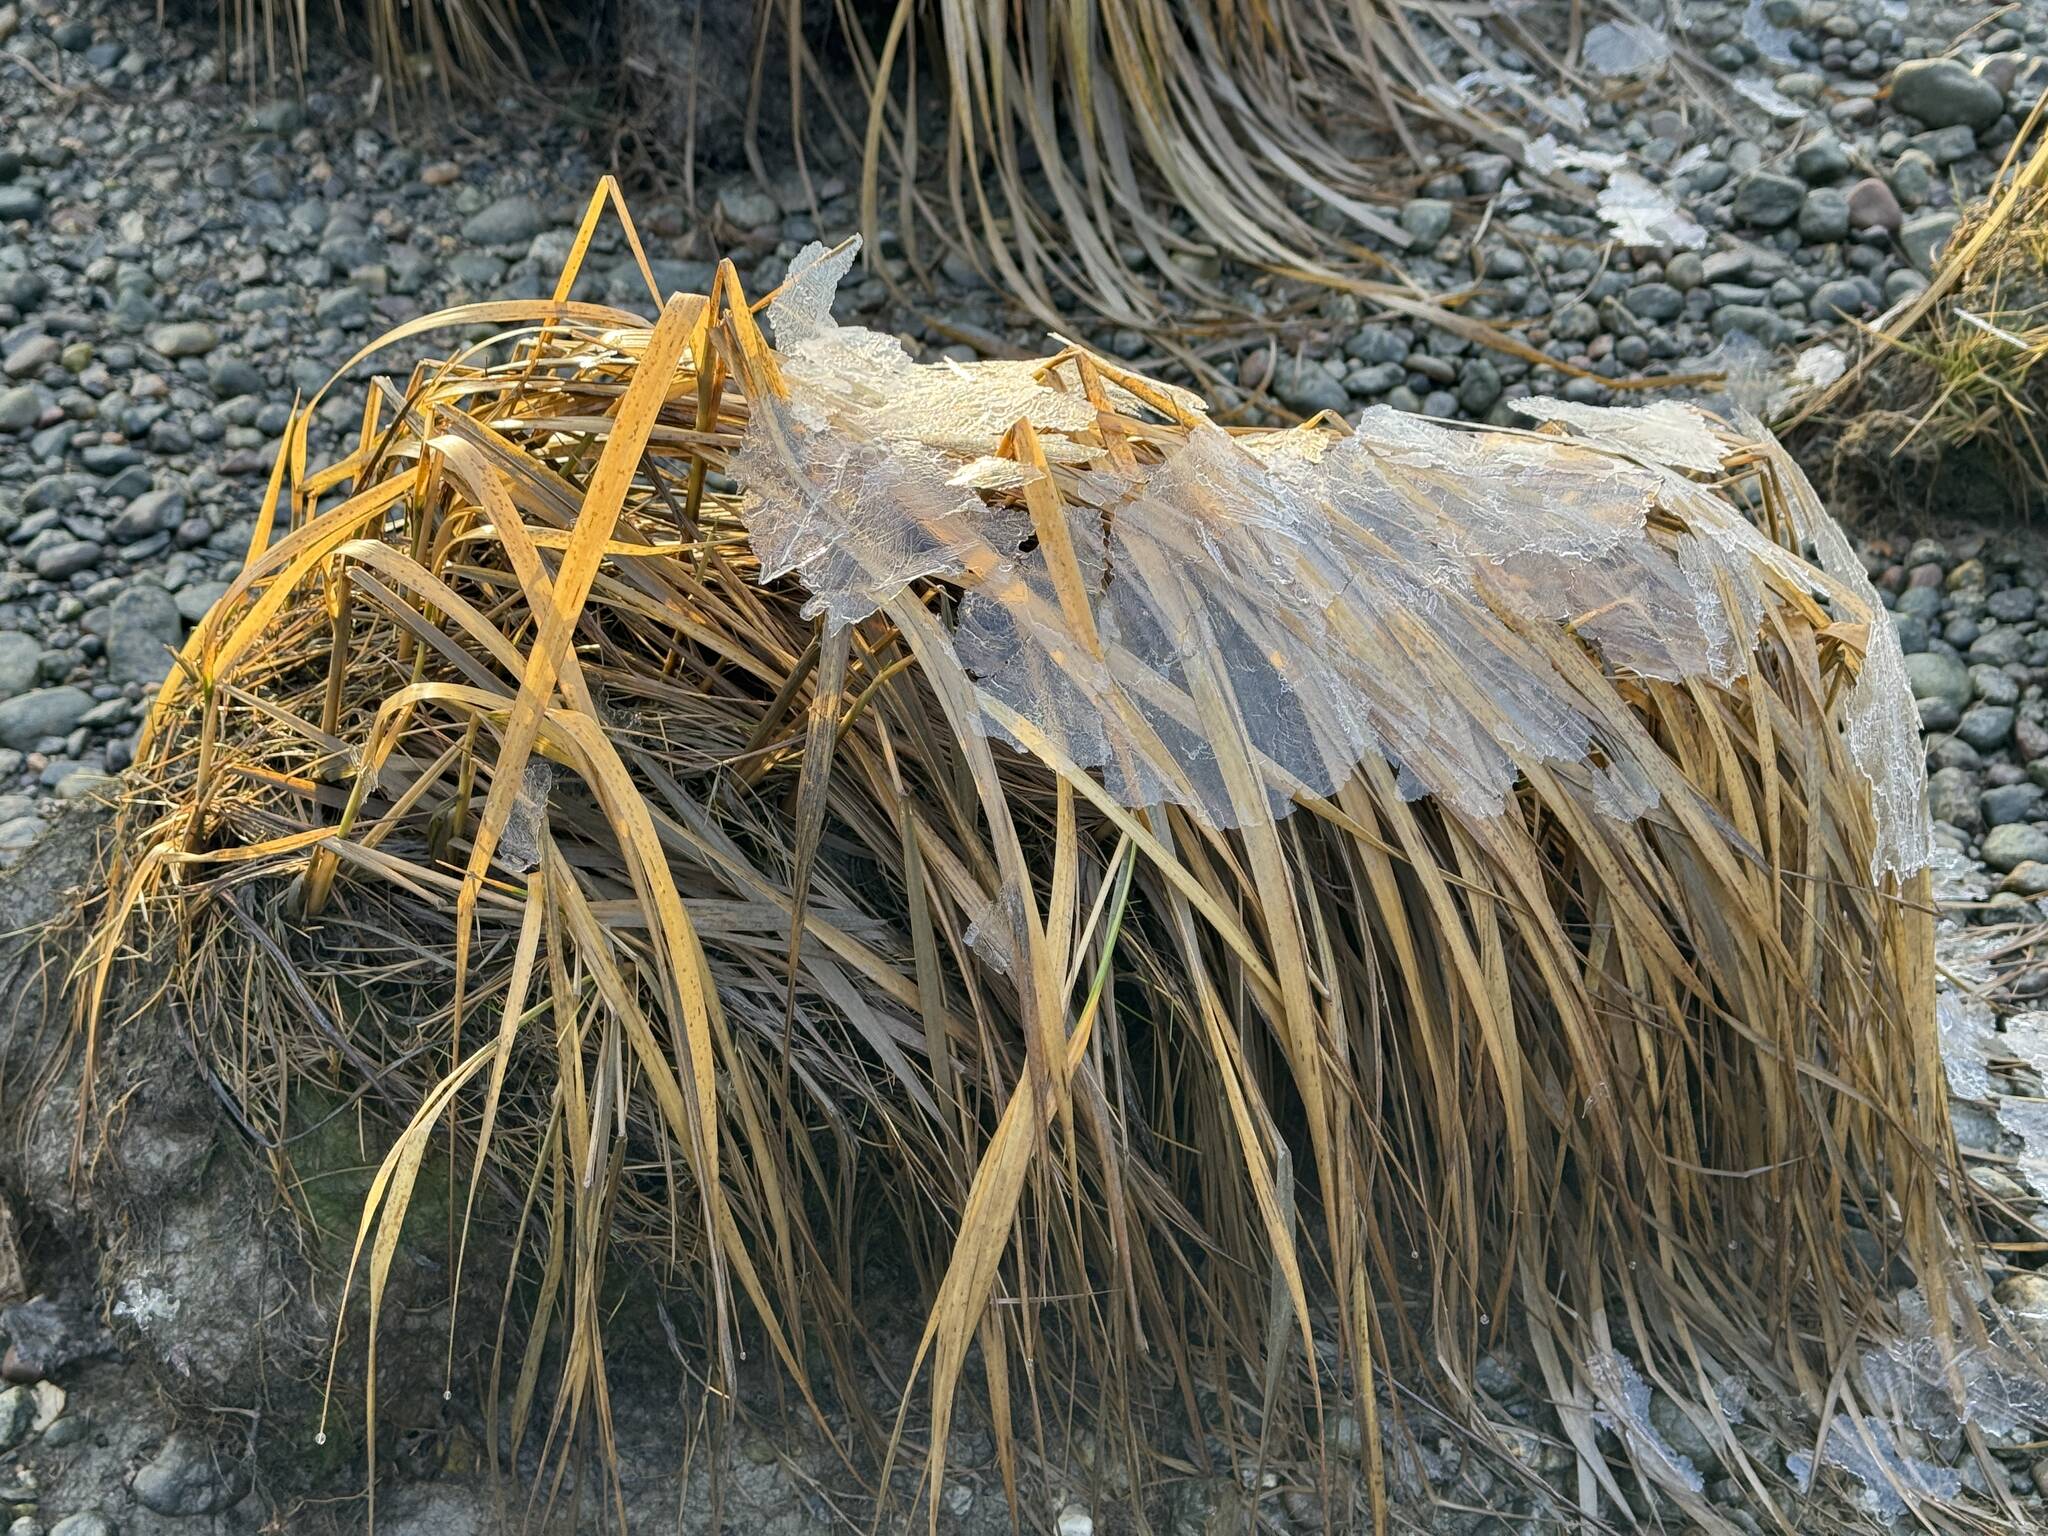 This ice-covered grass resembles a shaggy dog wearing a blanket along the Mendenhall Wetlands Trail on Dec. 2. (Photo by Deana Barajas)